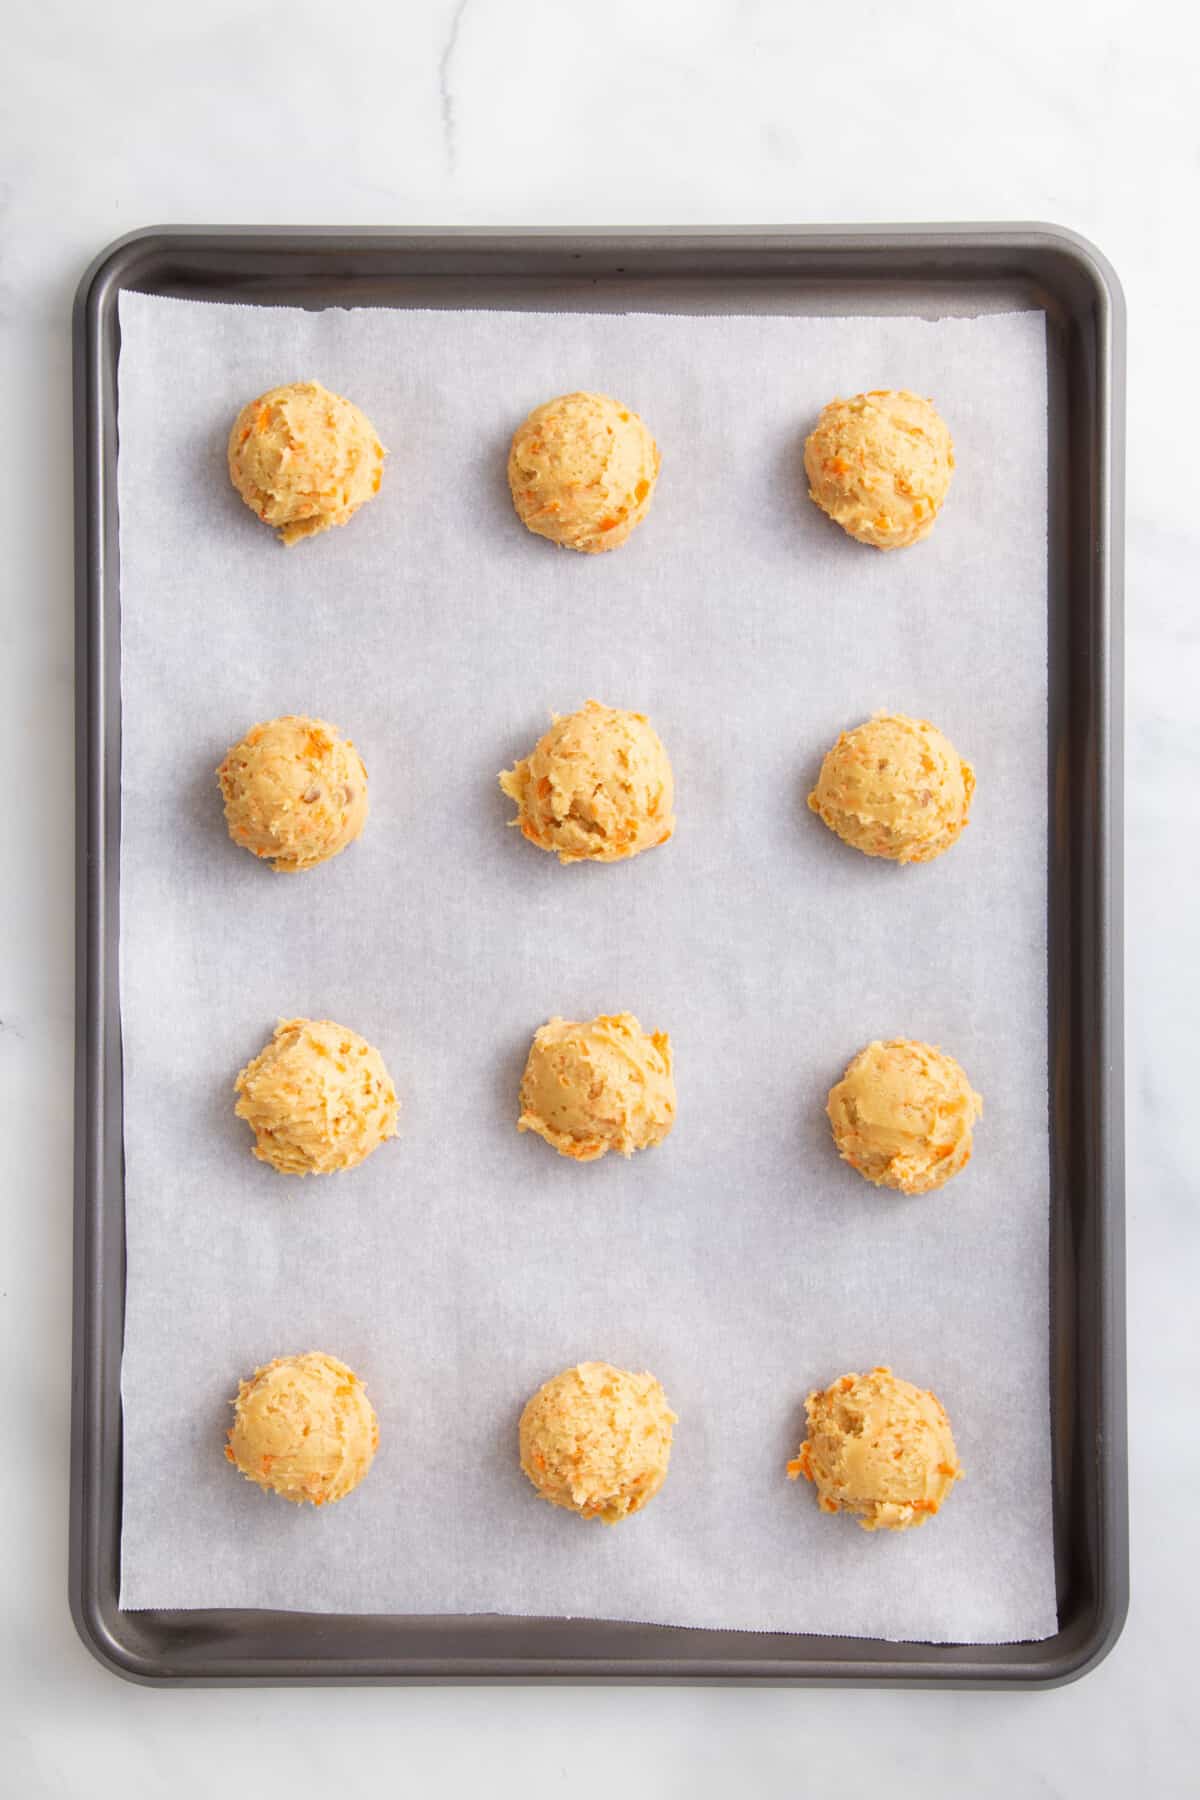 12 carrot cake cookie dough ball arranged on a parchment-lined baking sheet.